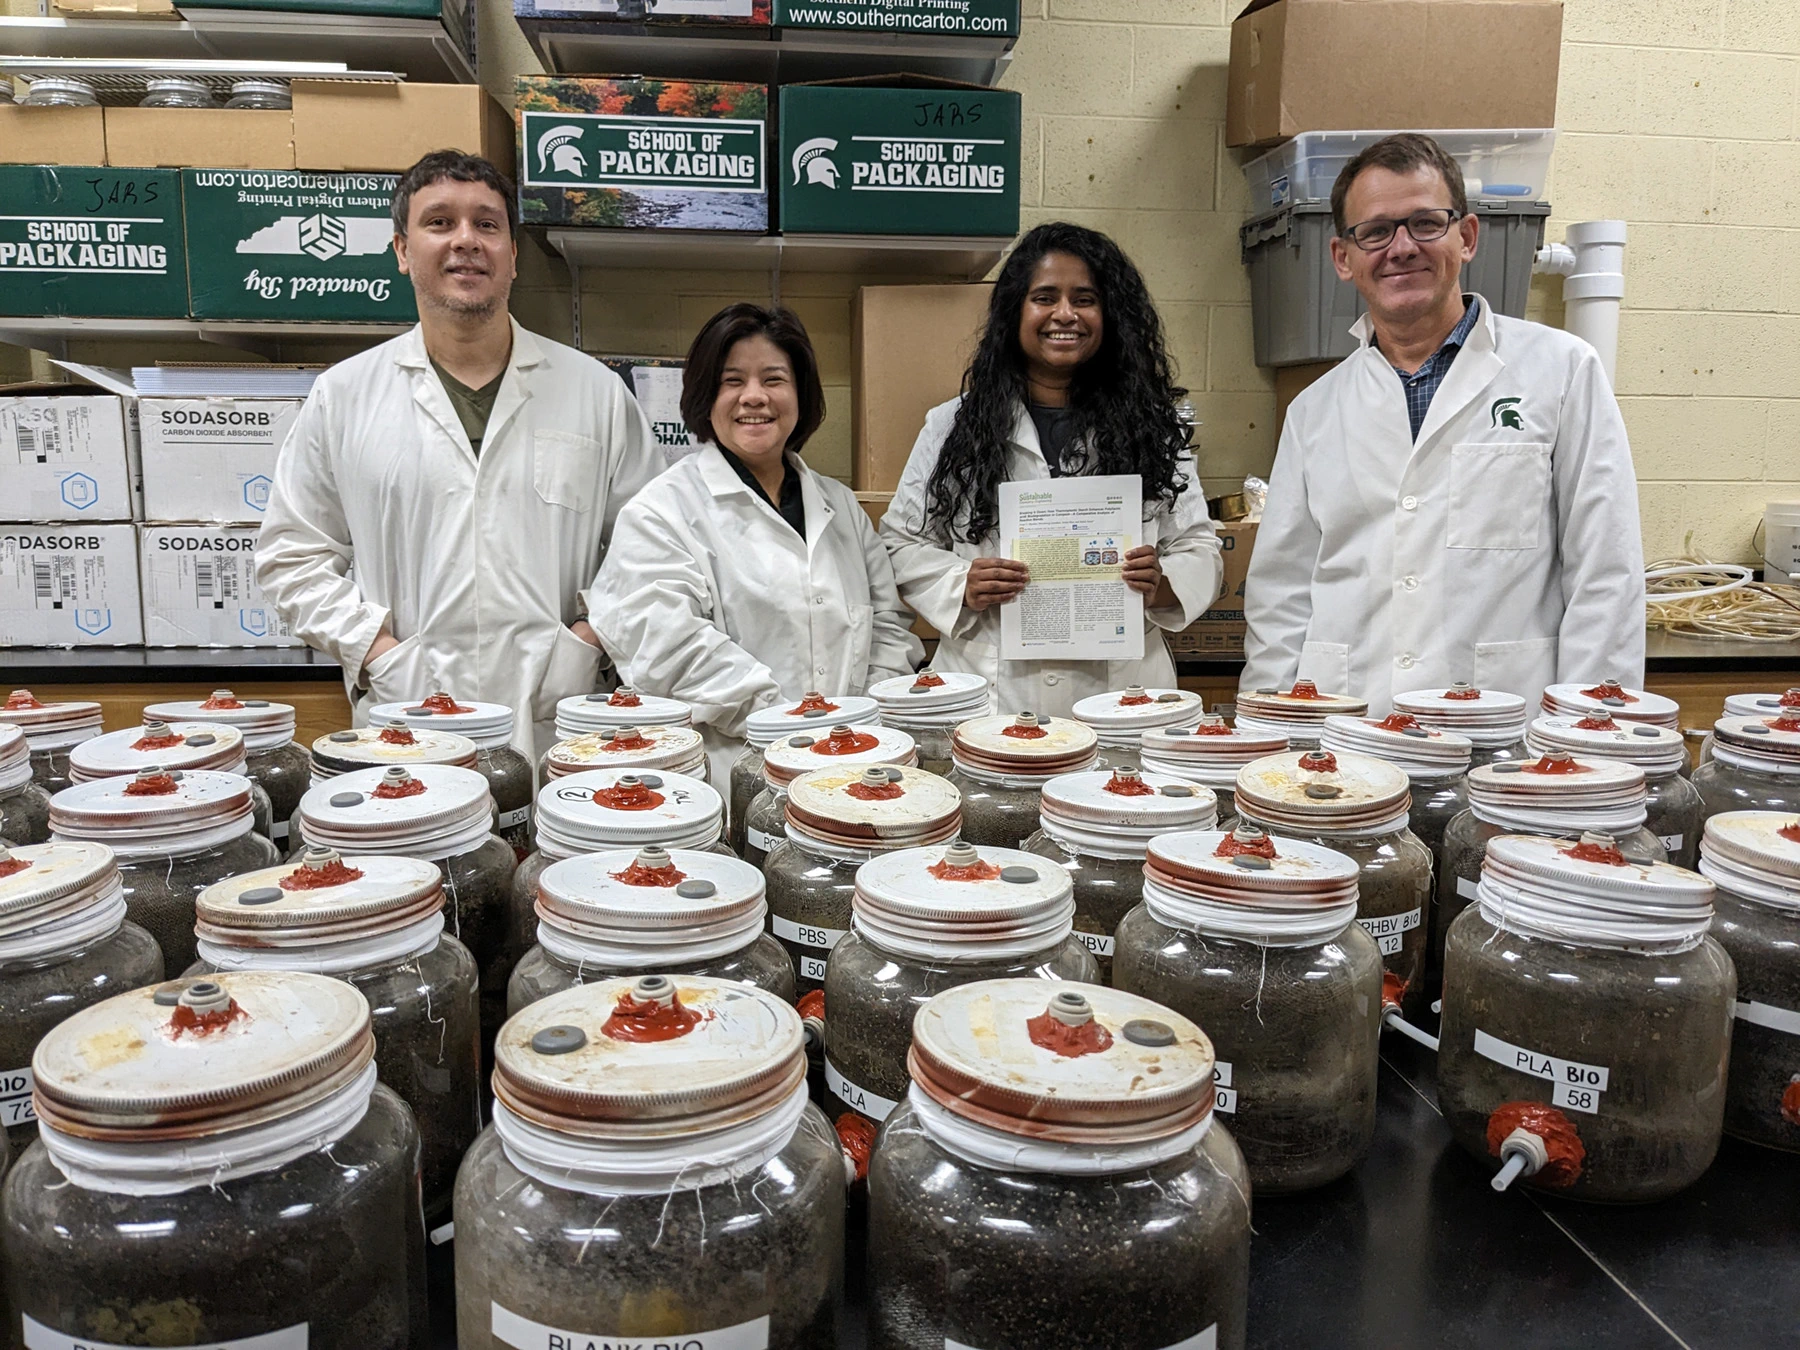 Anibal Bher, Wanwarang Limsukon, Pooja Mayekar and Rafael Auras stand in their lab wearing white lab coats. There’s a table in front of them holding dozens of bioreactors — clear glass jars sealed tightly with lids and filled with compost.